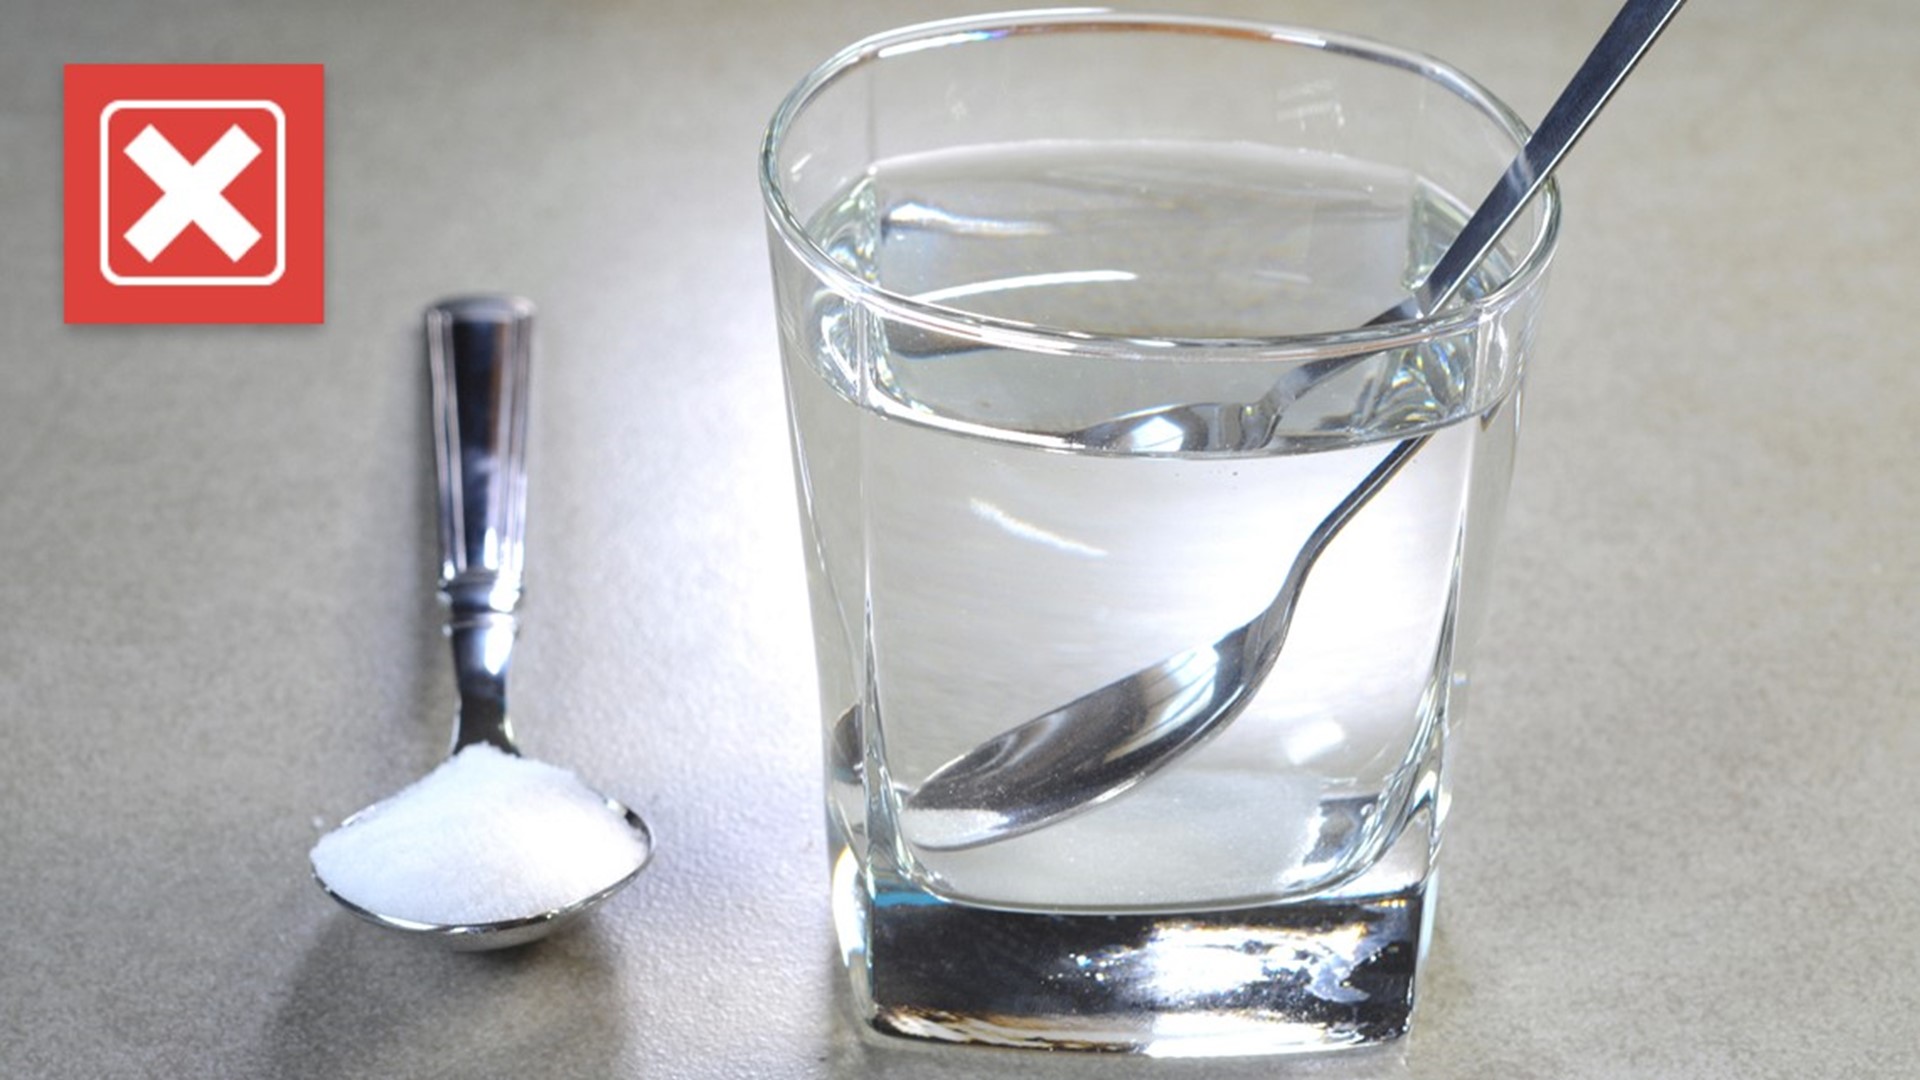 Gargling salt water can help ease sore throat pain, and health experts say it’s an effective remedy for killing bacteria and loosening mucus.